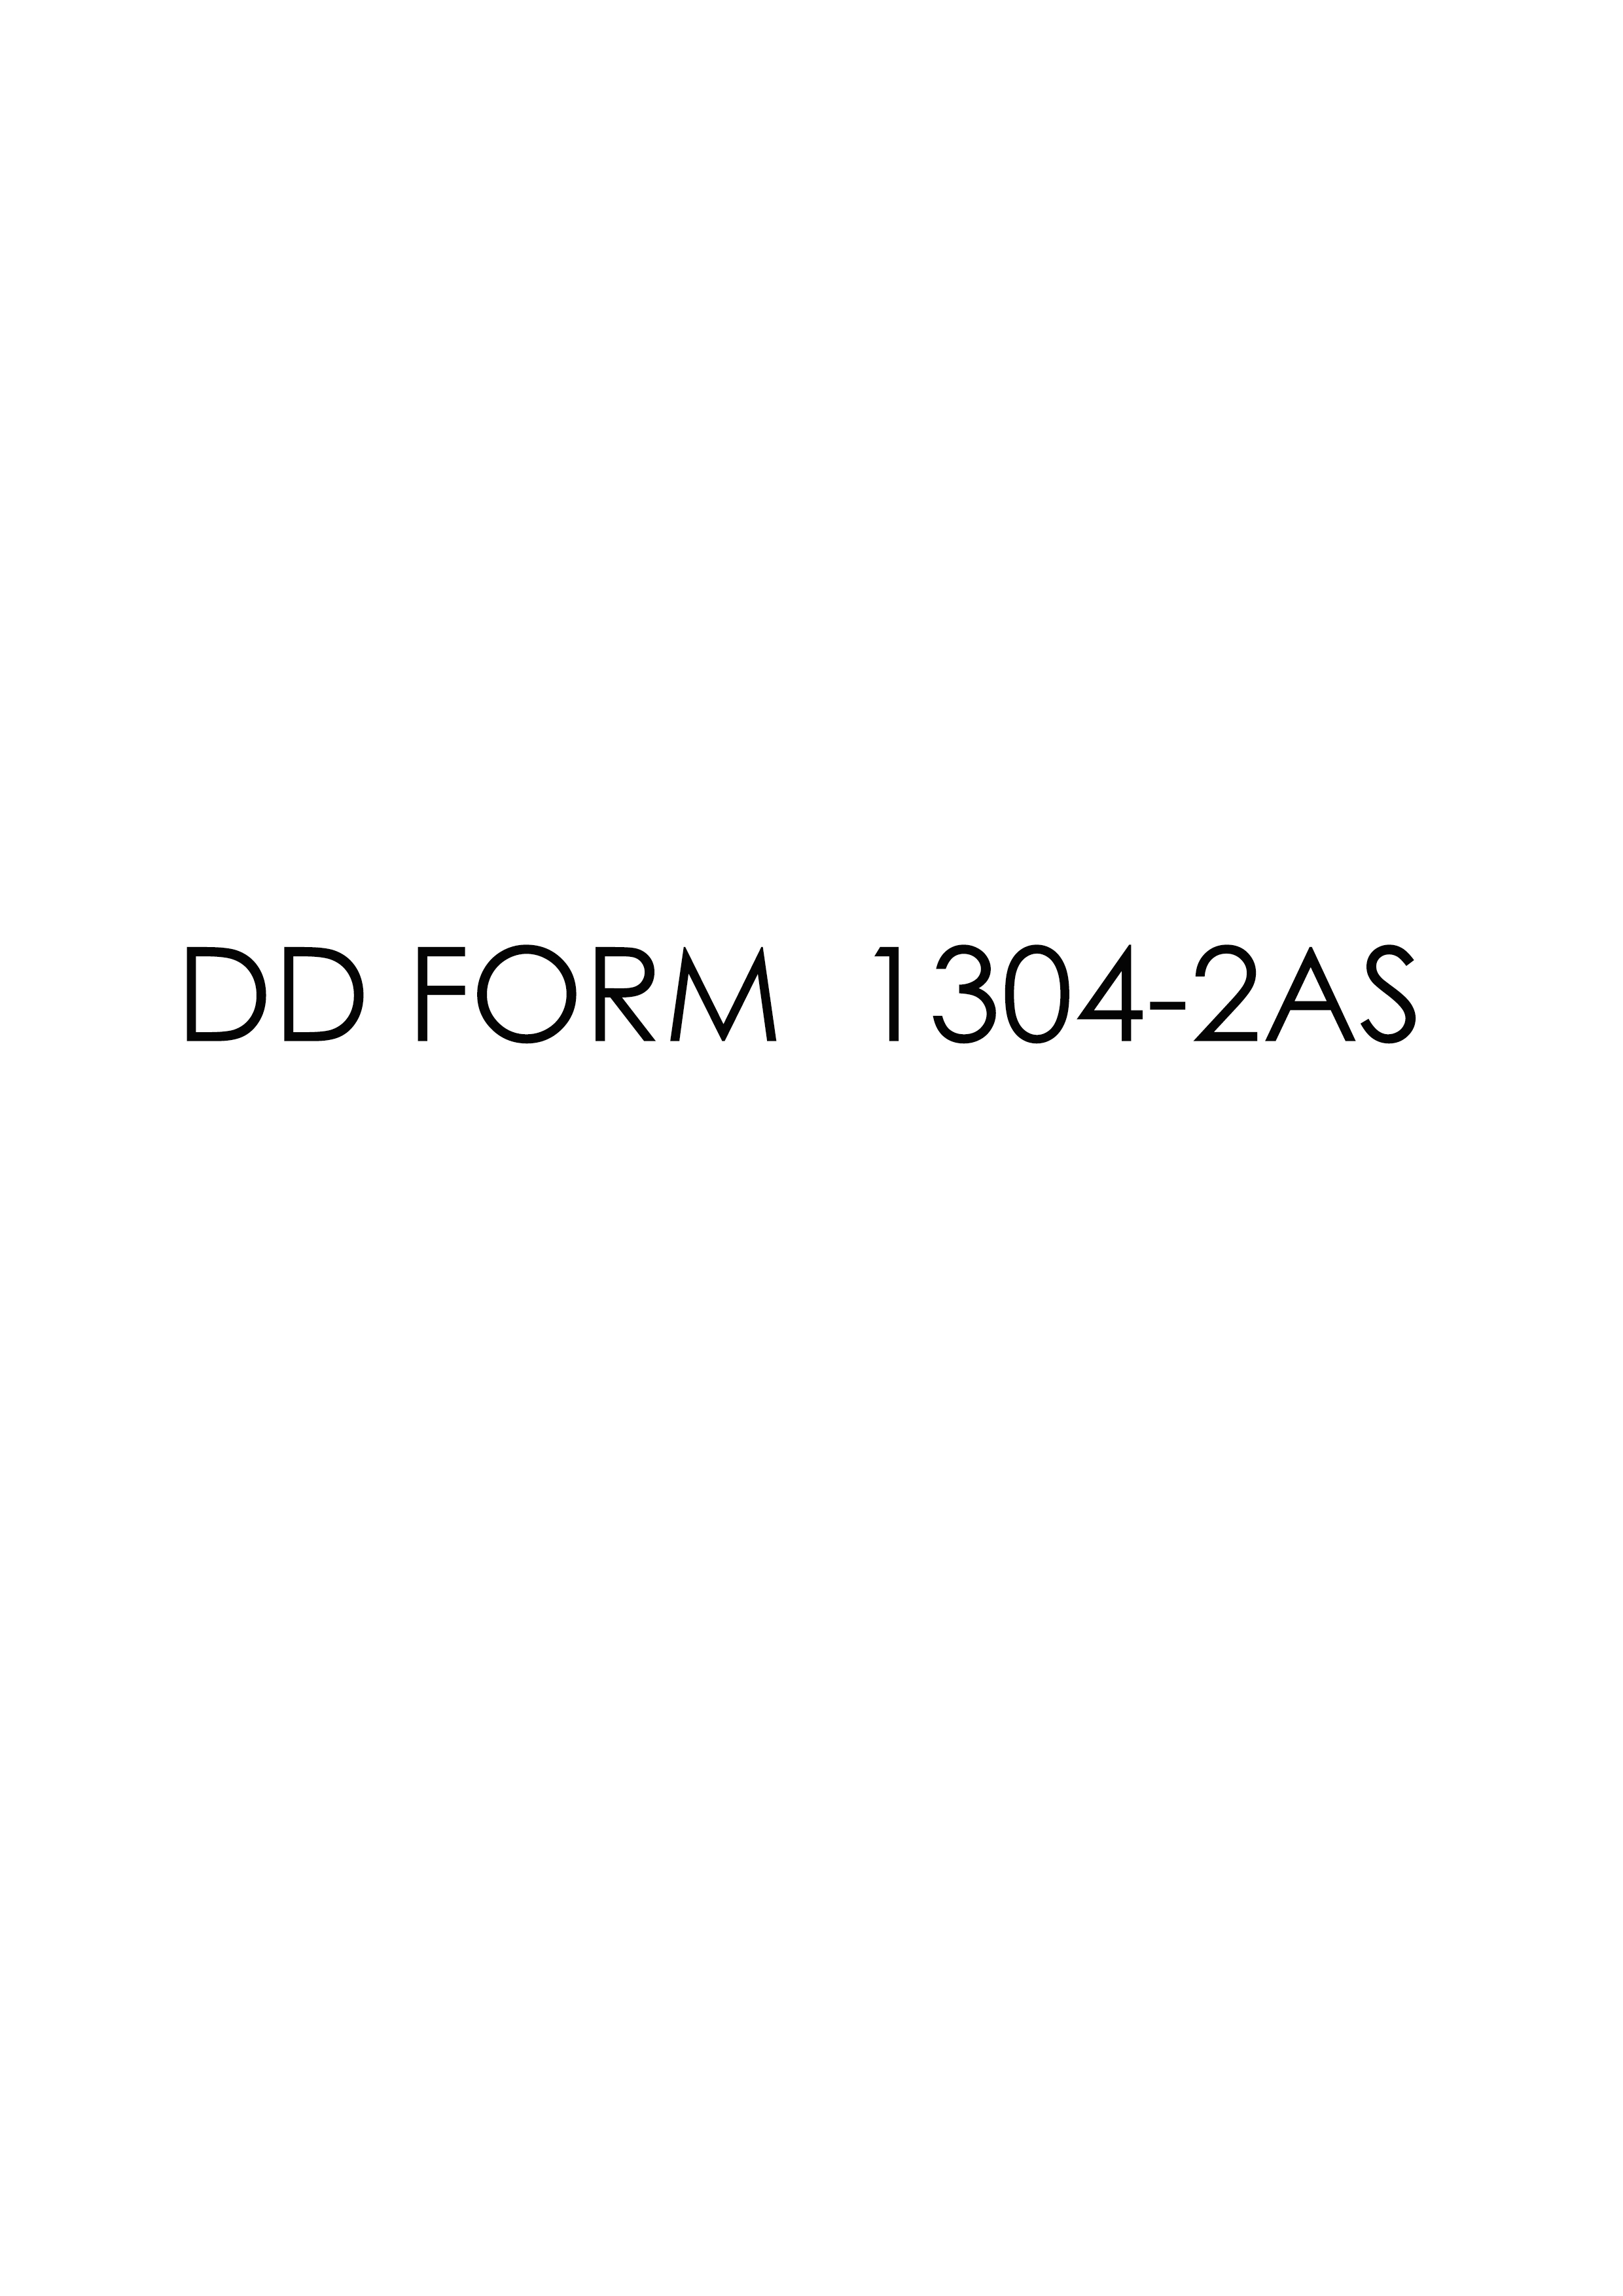 dd Form 1304-2AS fillable